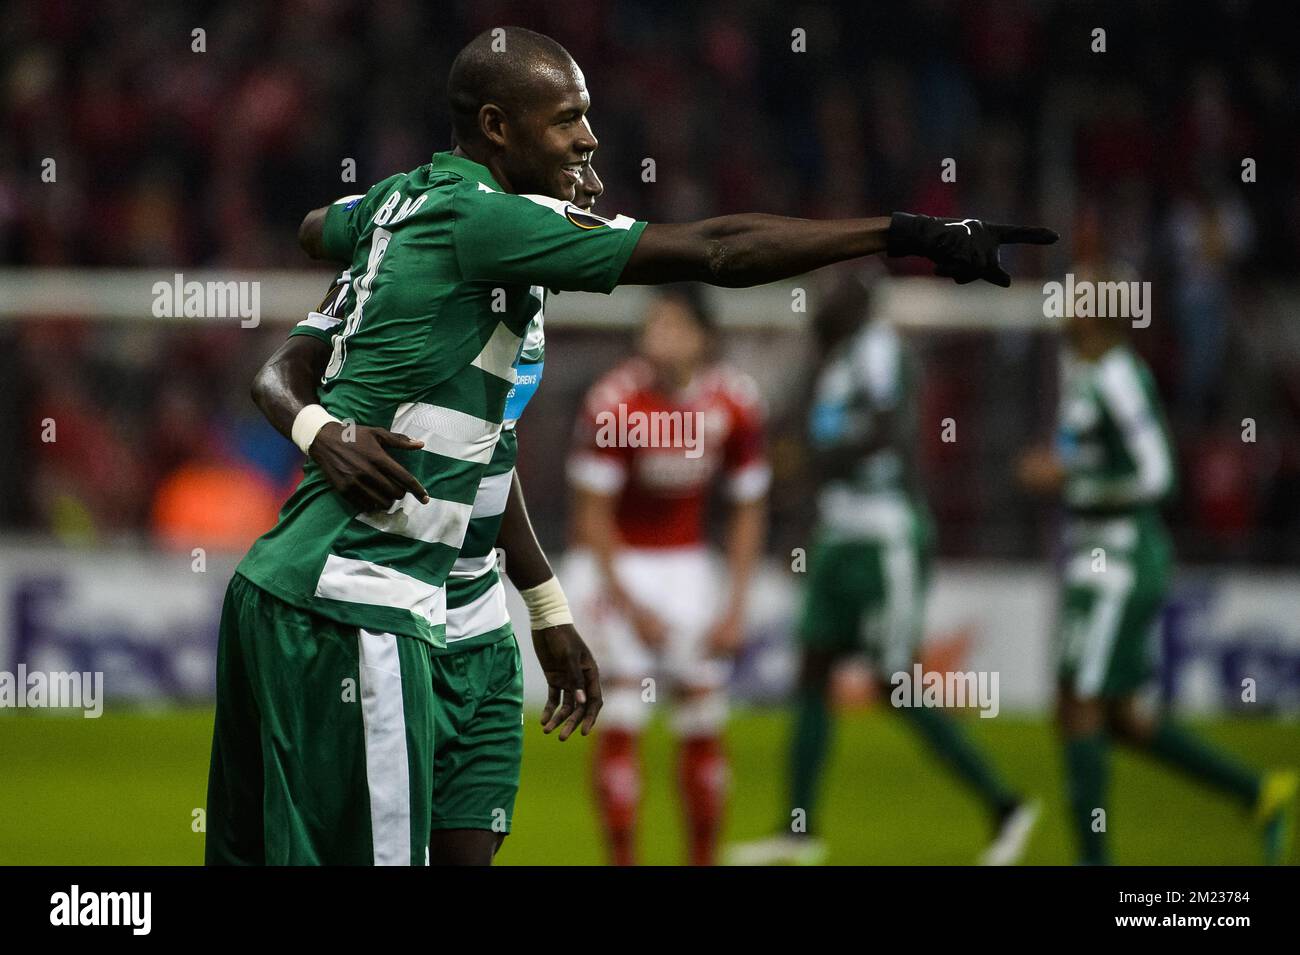 Panathinaikos' forward Victor Ibarbo celebrates after scoring during a third game of the group stage (group G) of the Europa League competition between Belgian soccer team Standard de Liege and Greek soccer team Panathinaikos, Thursday 20 October 2016, in Liege. BELGA PHOTO NICOLAS LAMBERT Stock Photo